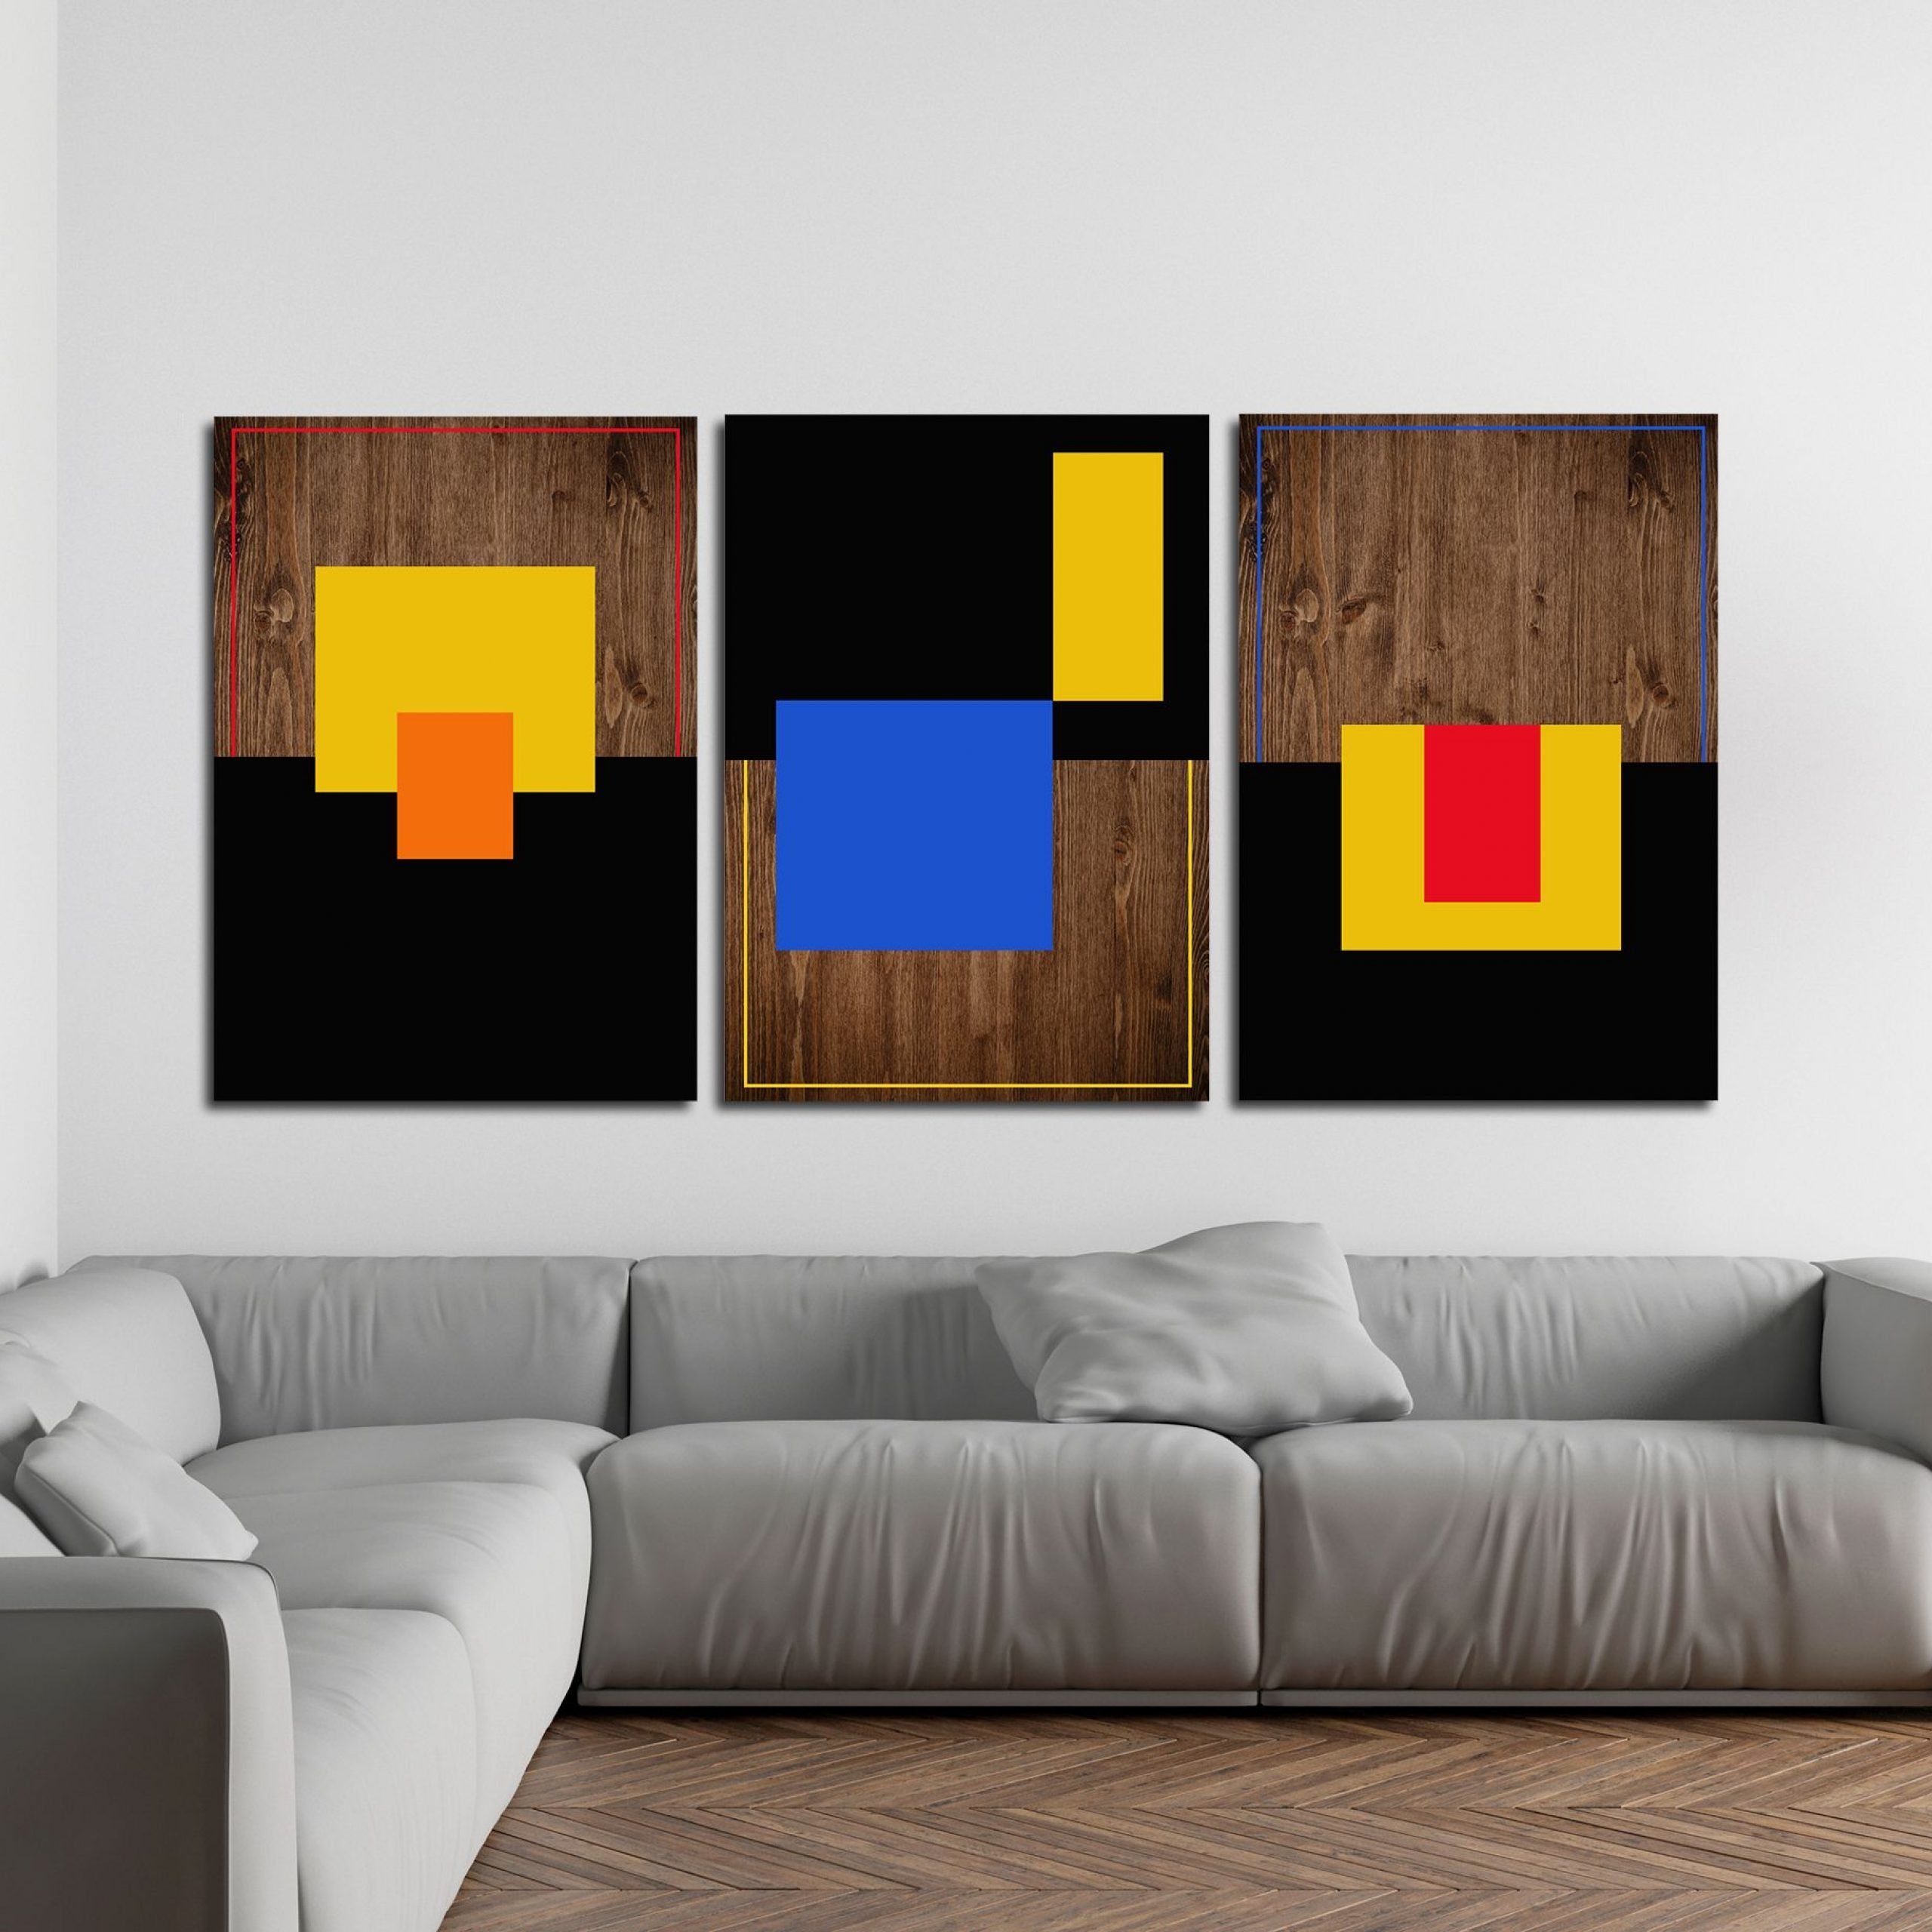 Trendy Buy Custom Made 3 Panel Art 72x40 – Wood Wall Art, Abstract Painting, Modern  Art, Home Decor, Made To Order From Mod Wood Art (View 7 of 15)